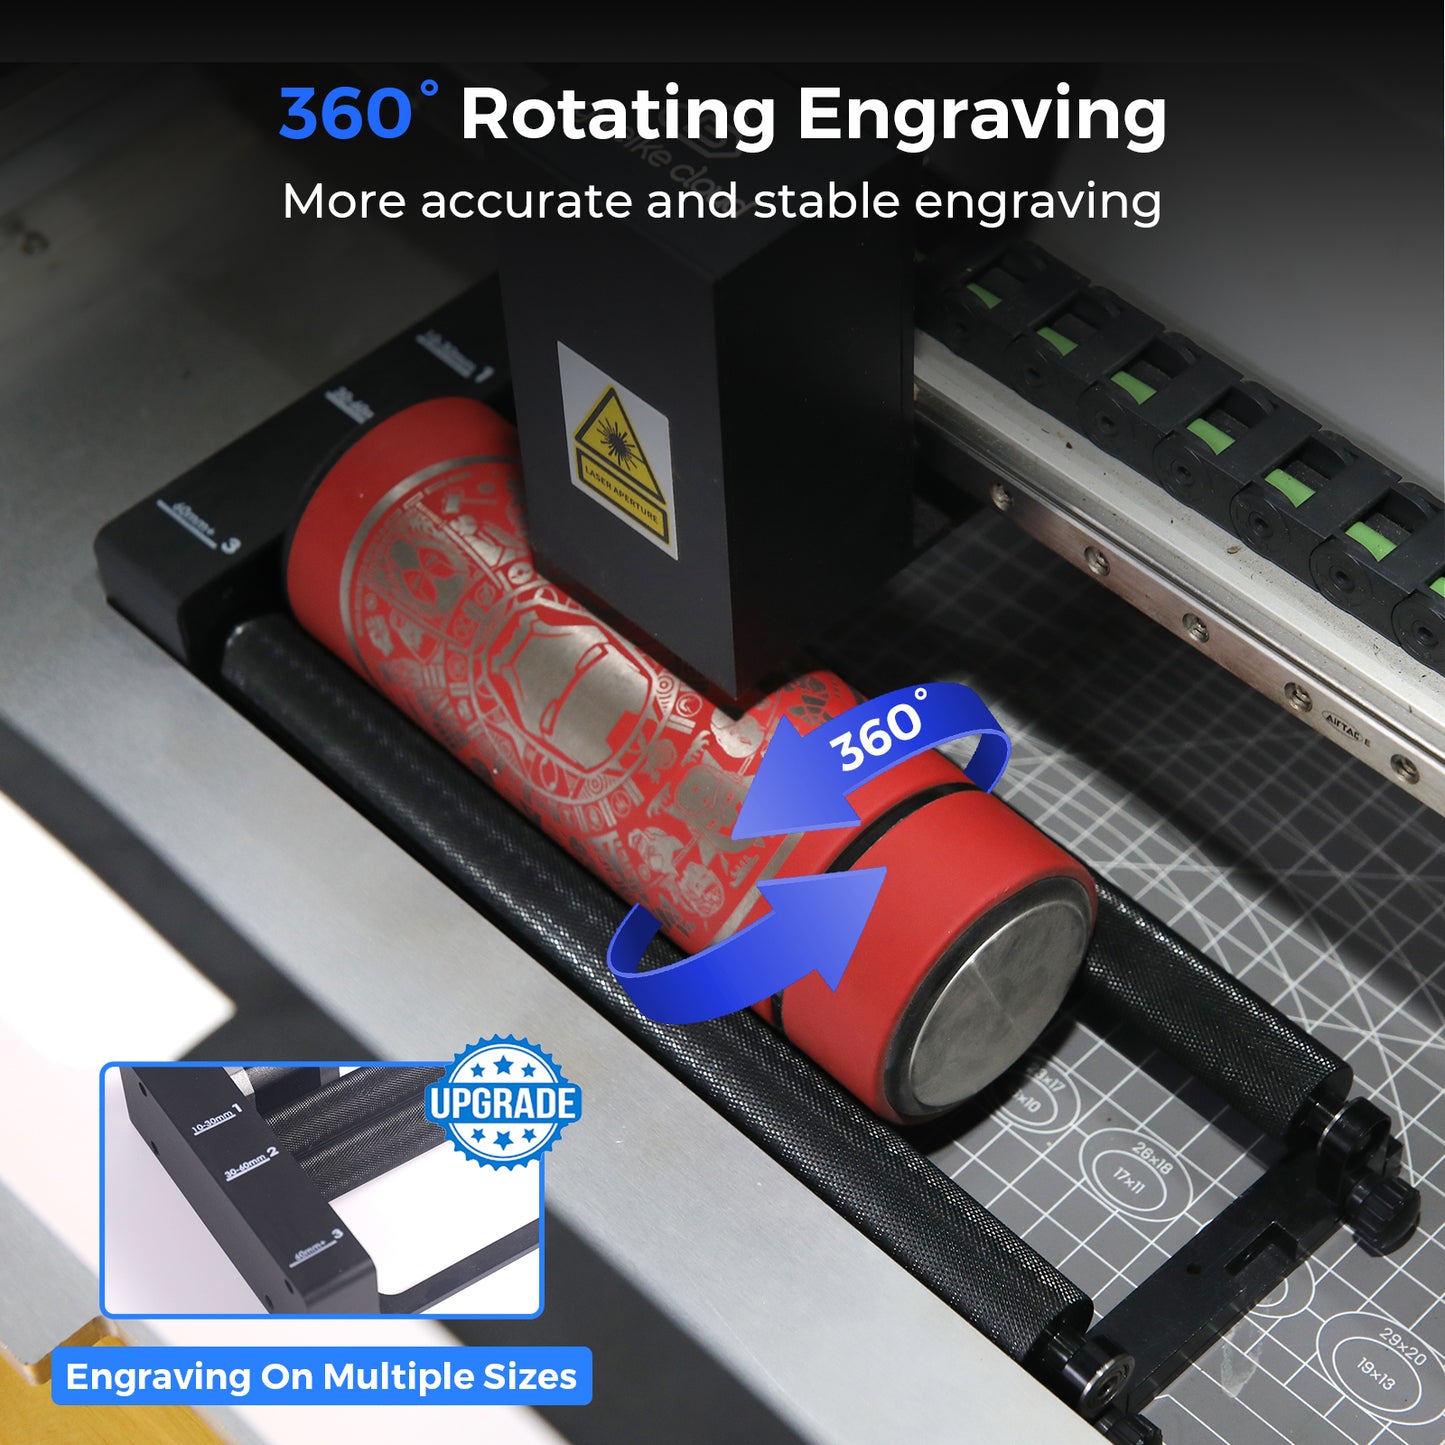 Co2 Laser Machine Engraving Paper Manufactures and Suppliers - 3D